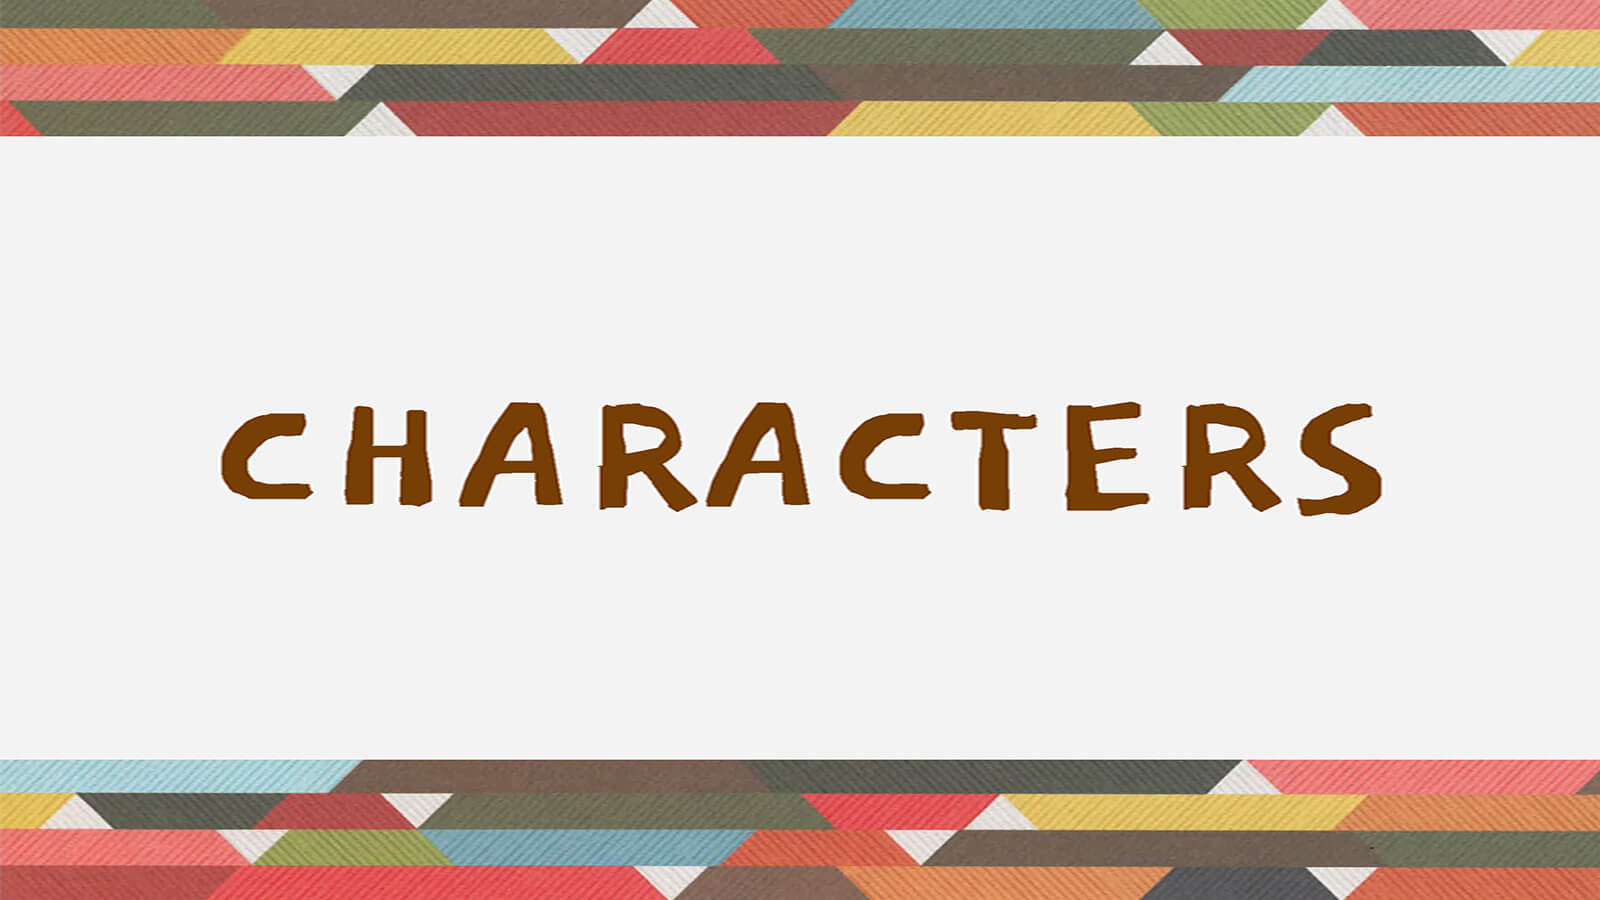 Slide reading "Characters"